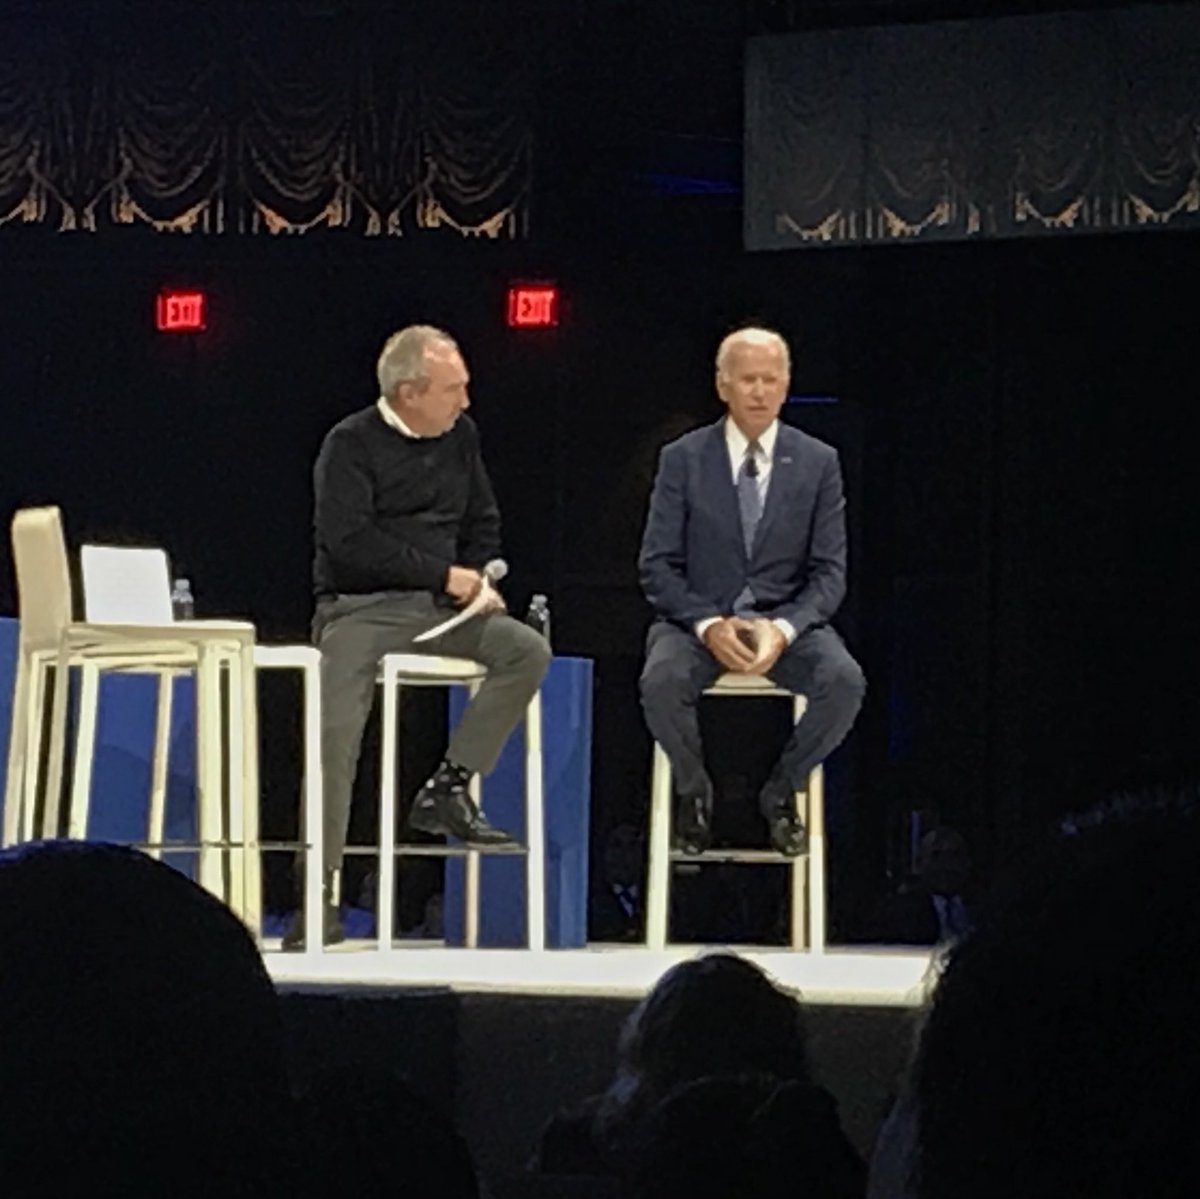 Vice President Biden’s advice for patients: The single greatest thing desperate patients need today it hope. Anything can happen, and a breakthrough can happen tomorrow. #bidencancersummit